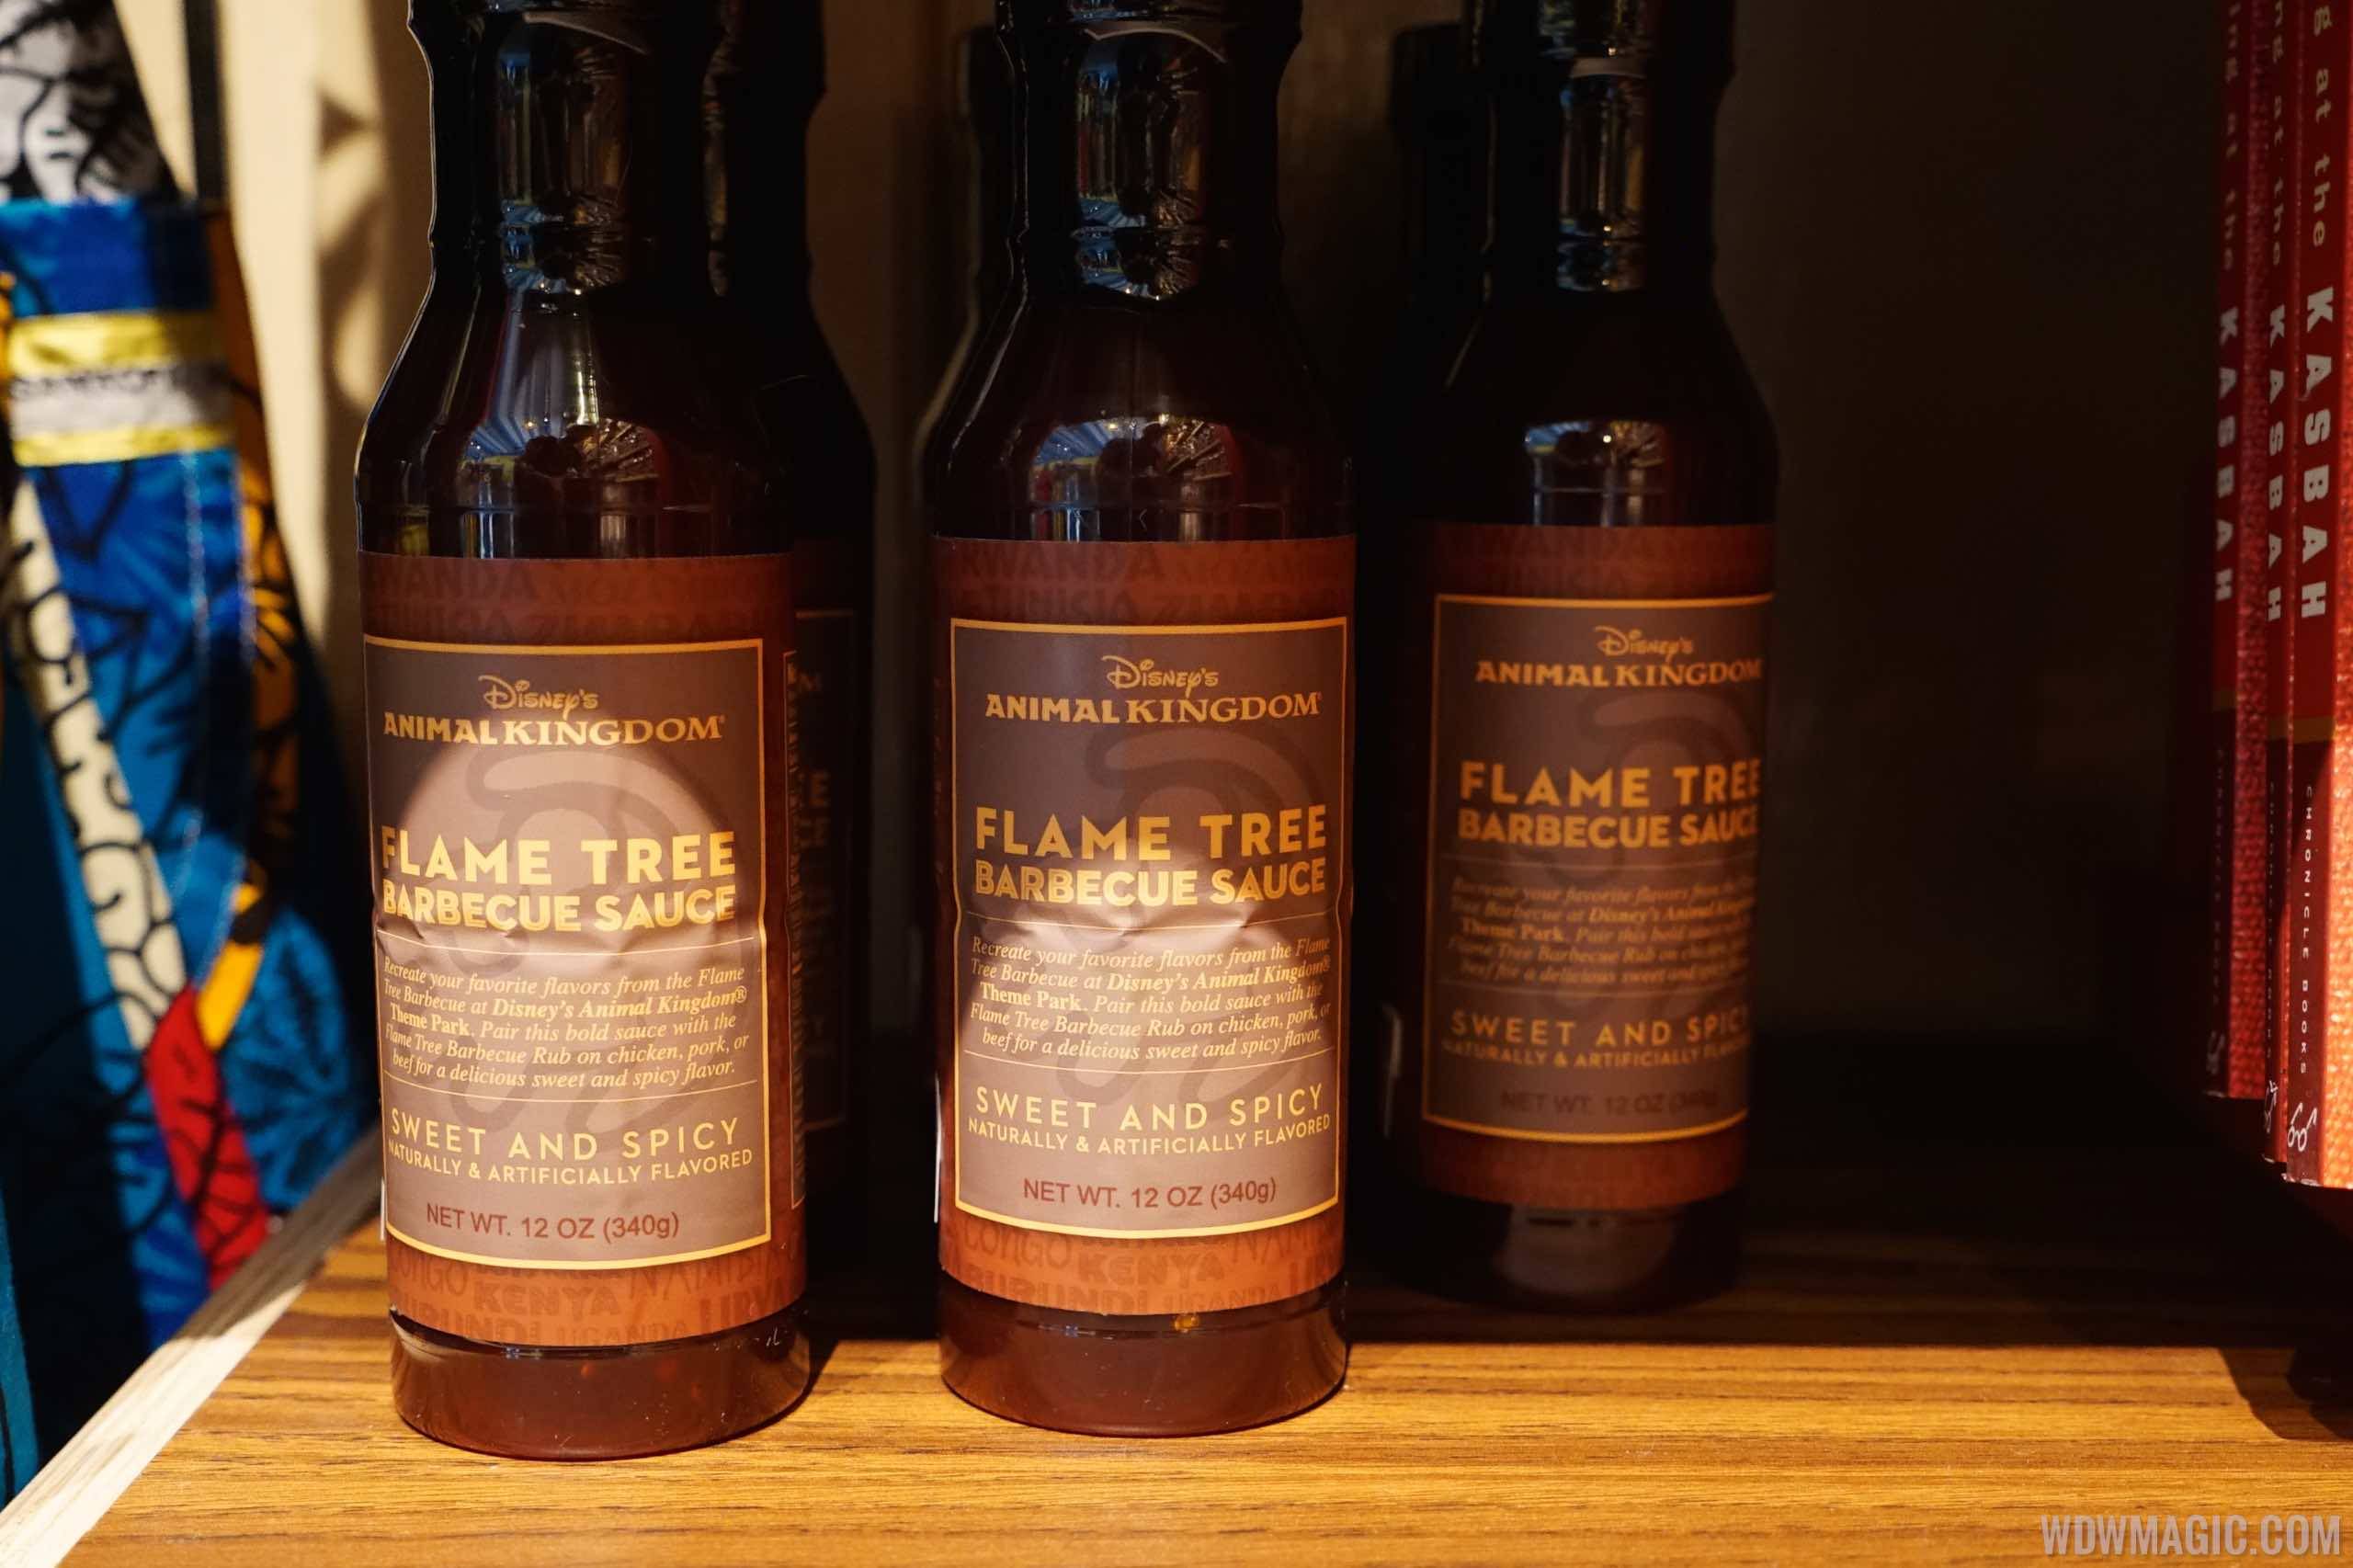 Flame tree Barbecue Sauce bottle